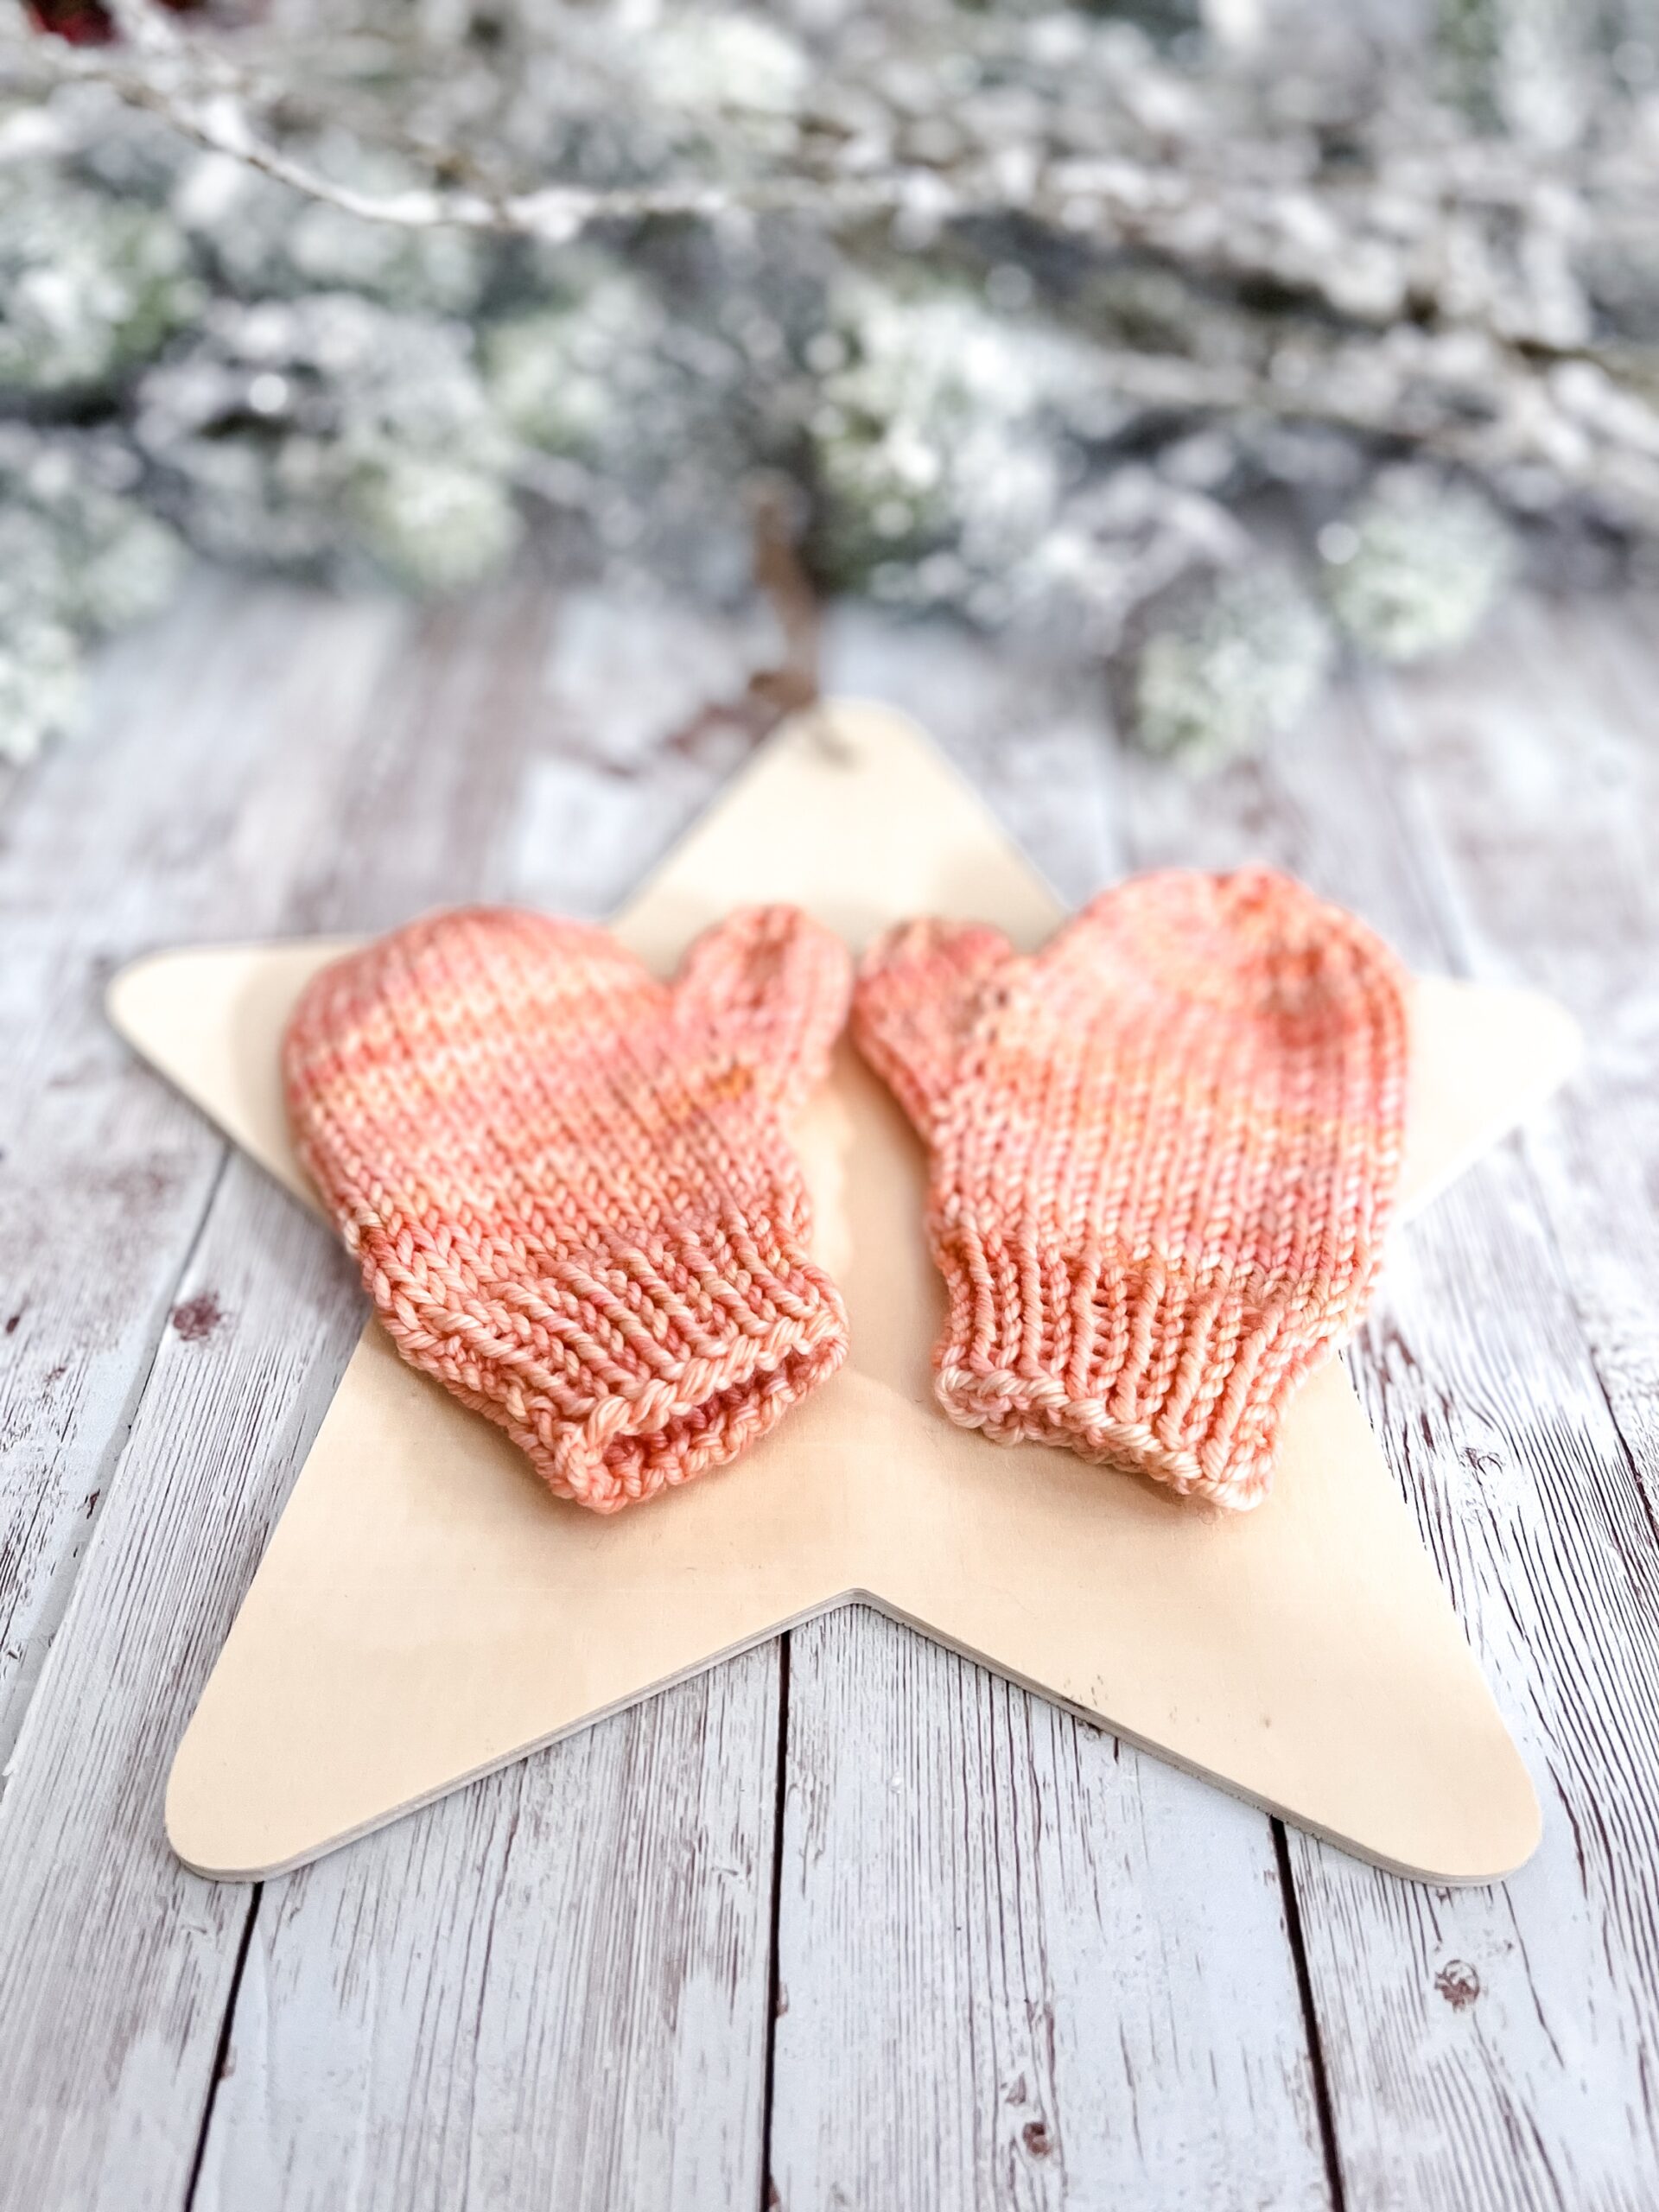 A pair of peach colored mittens rests on a wooden star cutout on a wood plank background. In the background of the photo is snow covered pine branches